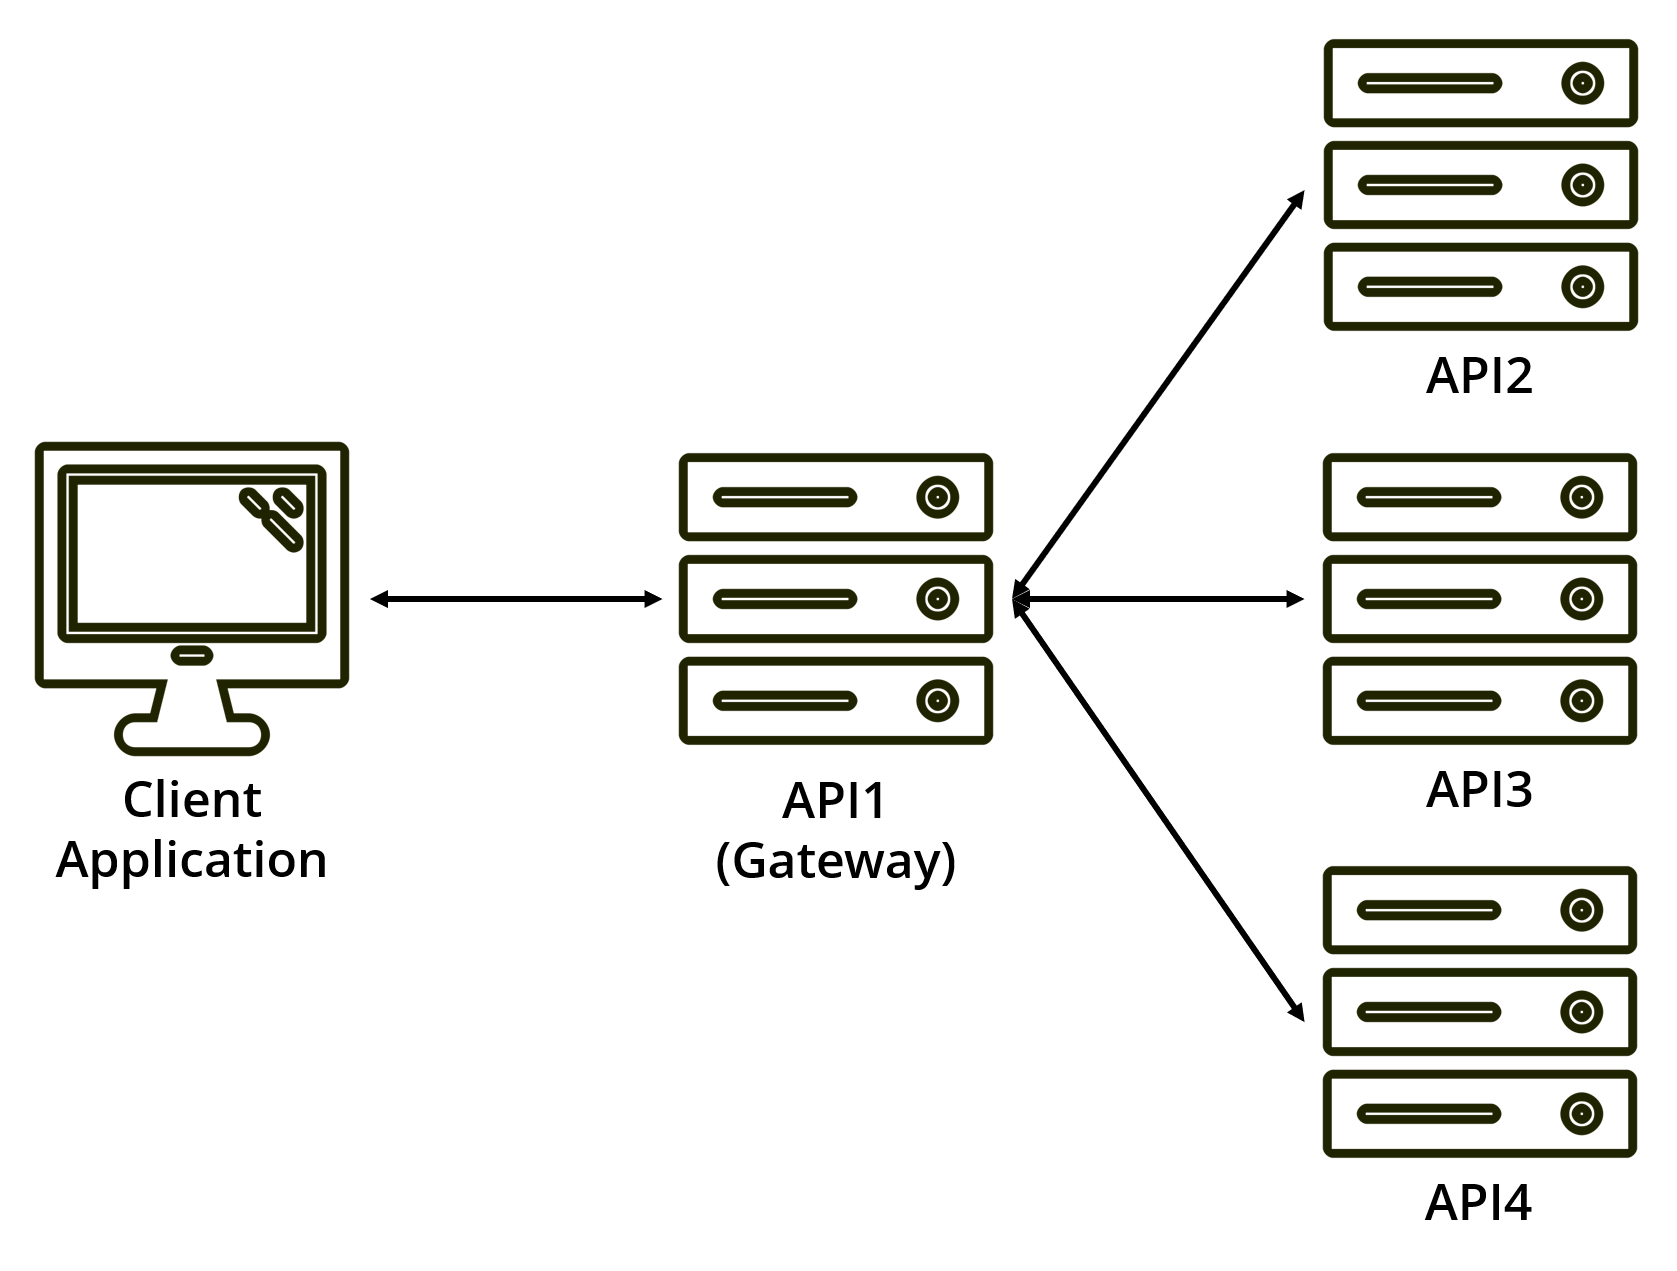 An OAuth client application calling an API Gateway, which in turn calls many other APIs